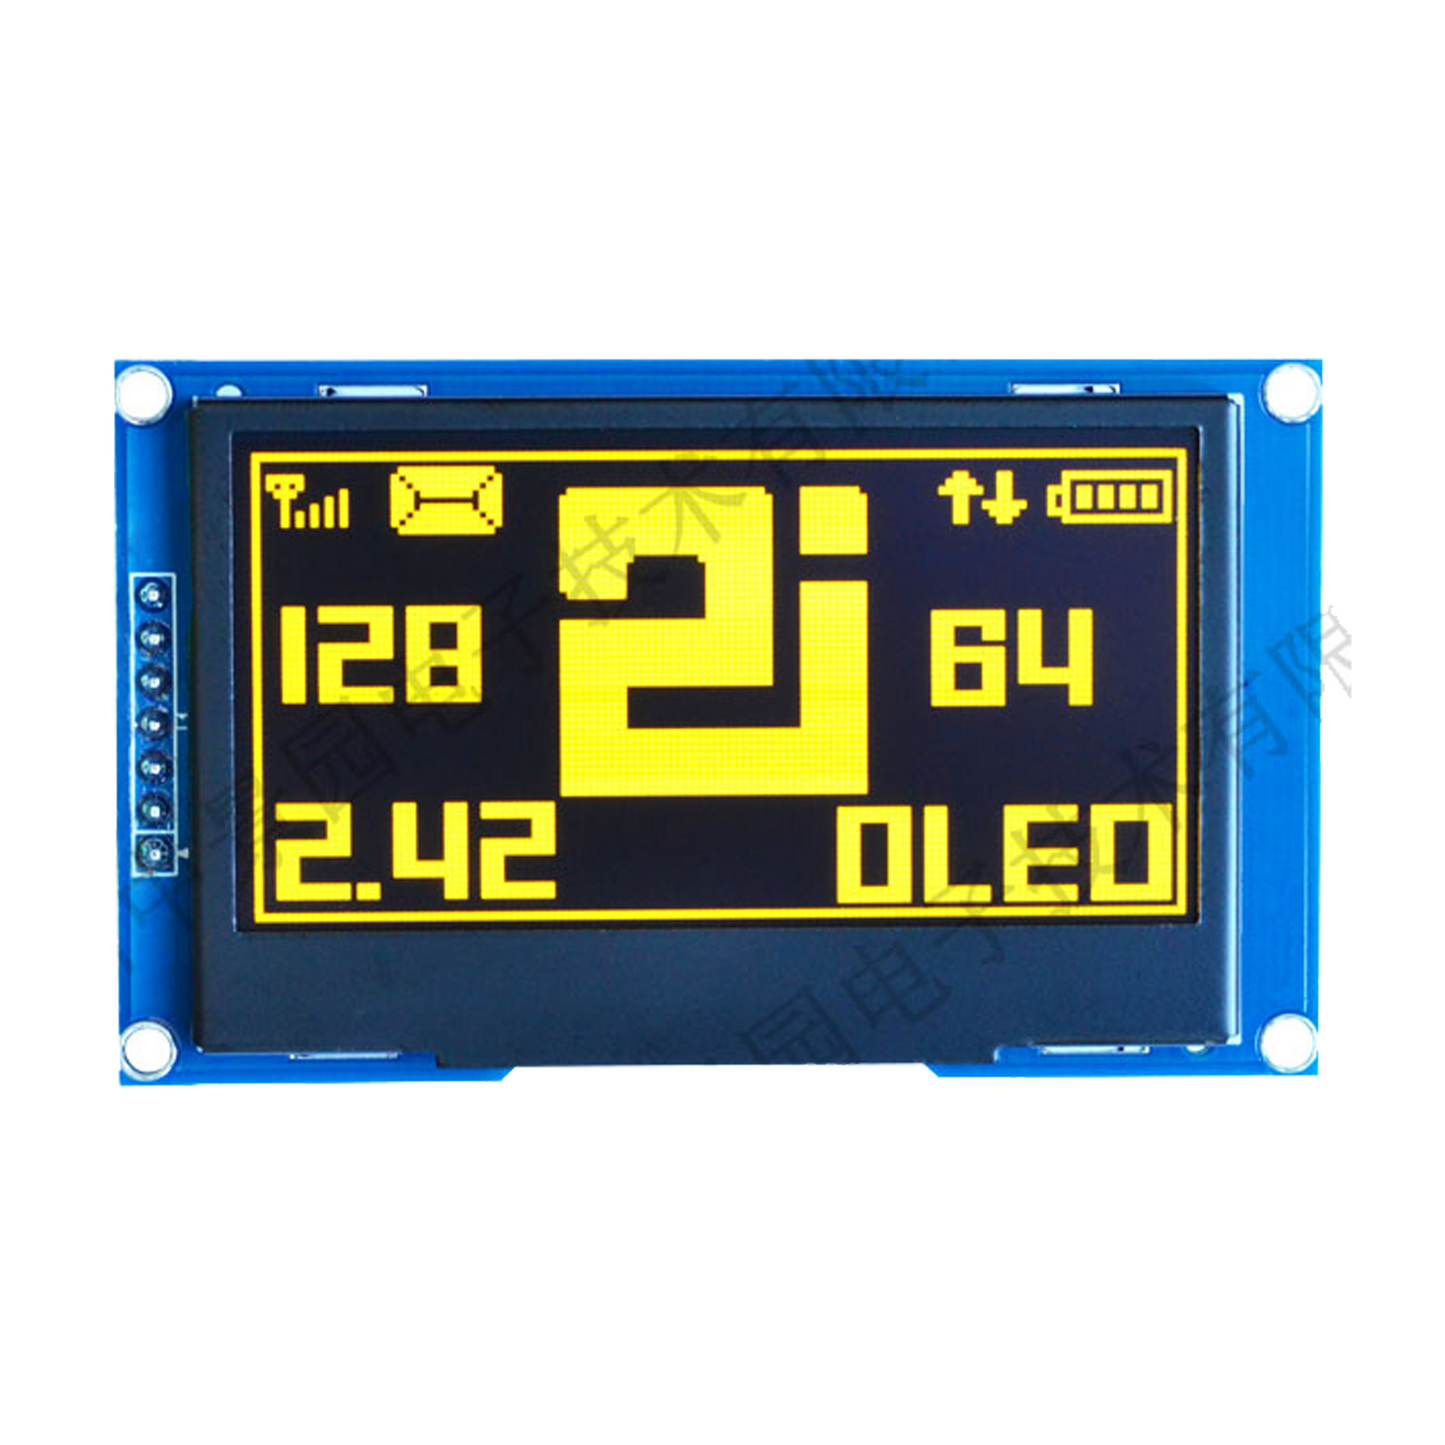 Yellow 2.4-inch screen displaying some numbers